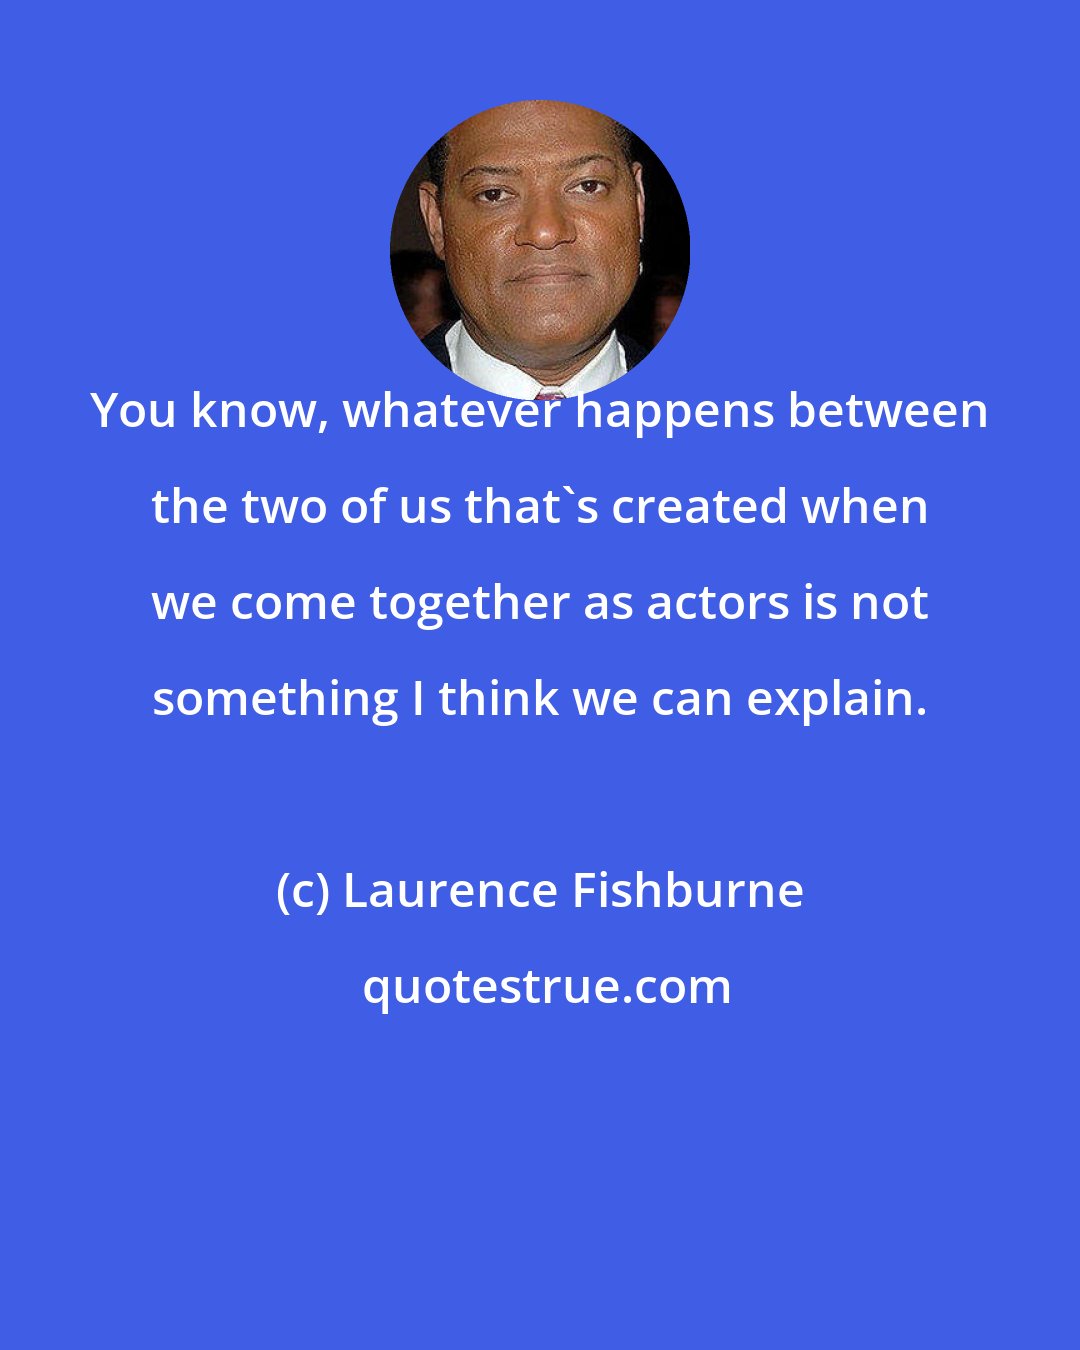 Laurence Fishburne: You know, whatever happens between the two of us that's created when we come together as actors is not something I think we can explain.